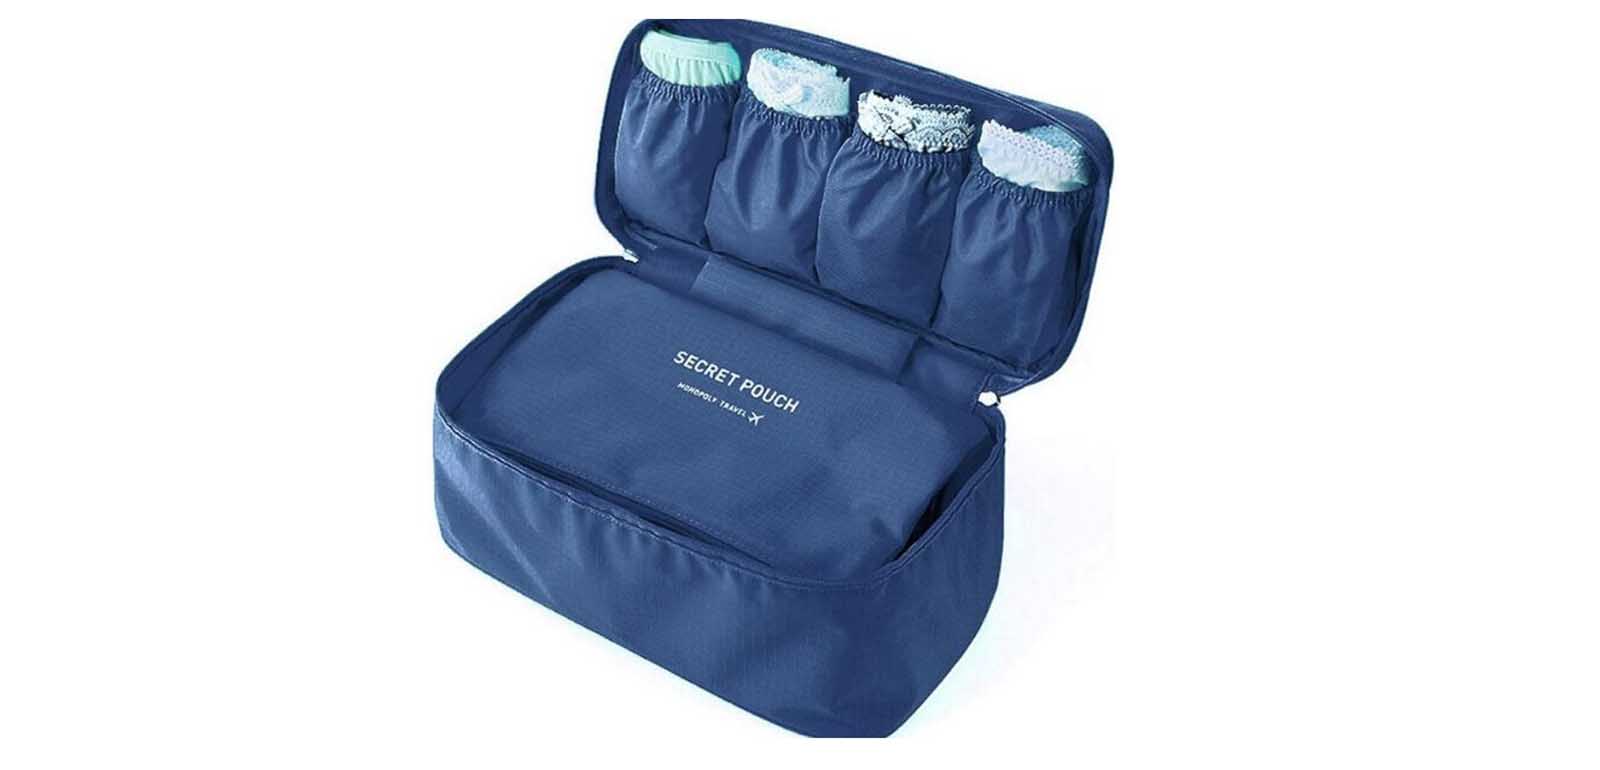 Portable Travel Storage Bag, Simple Organizer For Underwear, Multi Bag With  Compartments And Zipper